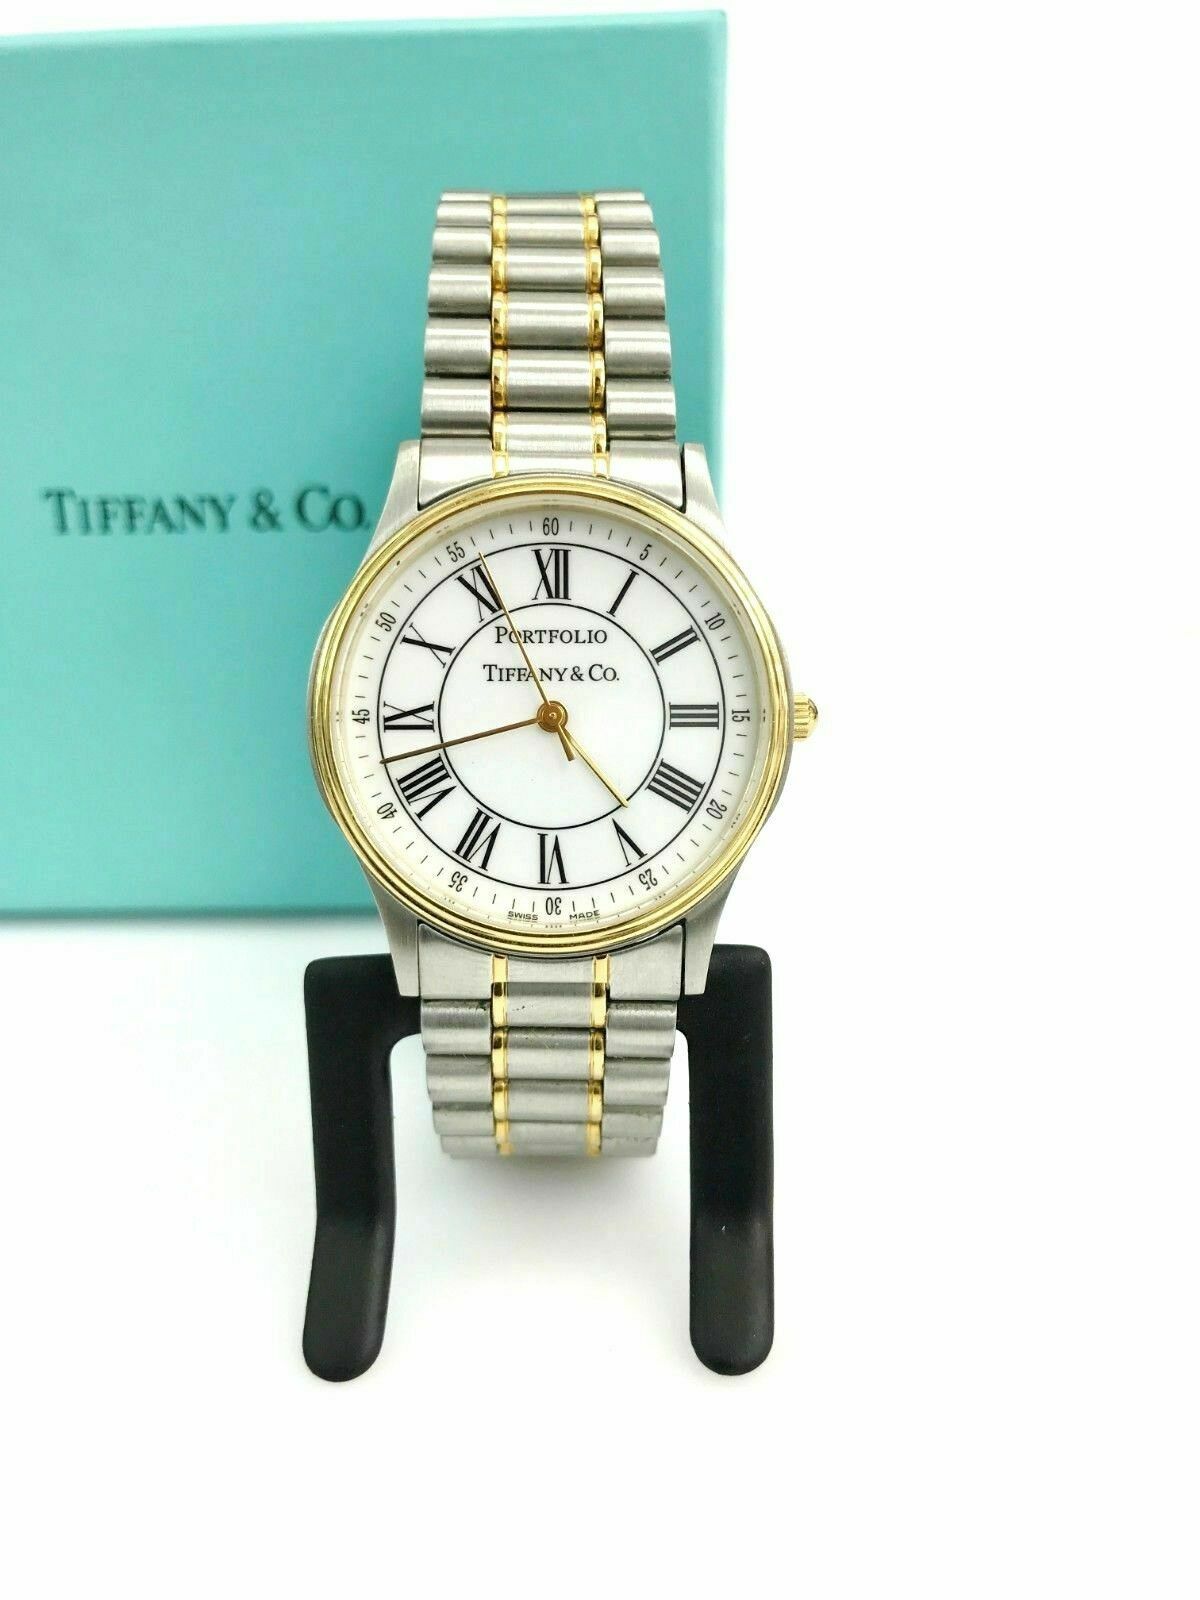 co Women's Watches: Luxury Watches for Women | Tiffany & Co. | ShopLook